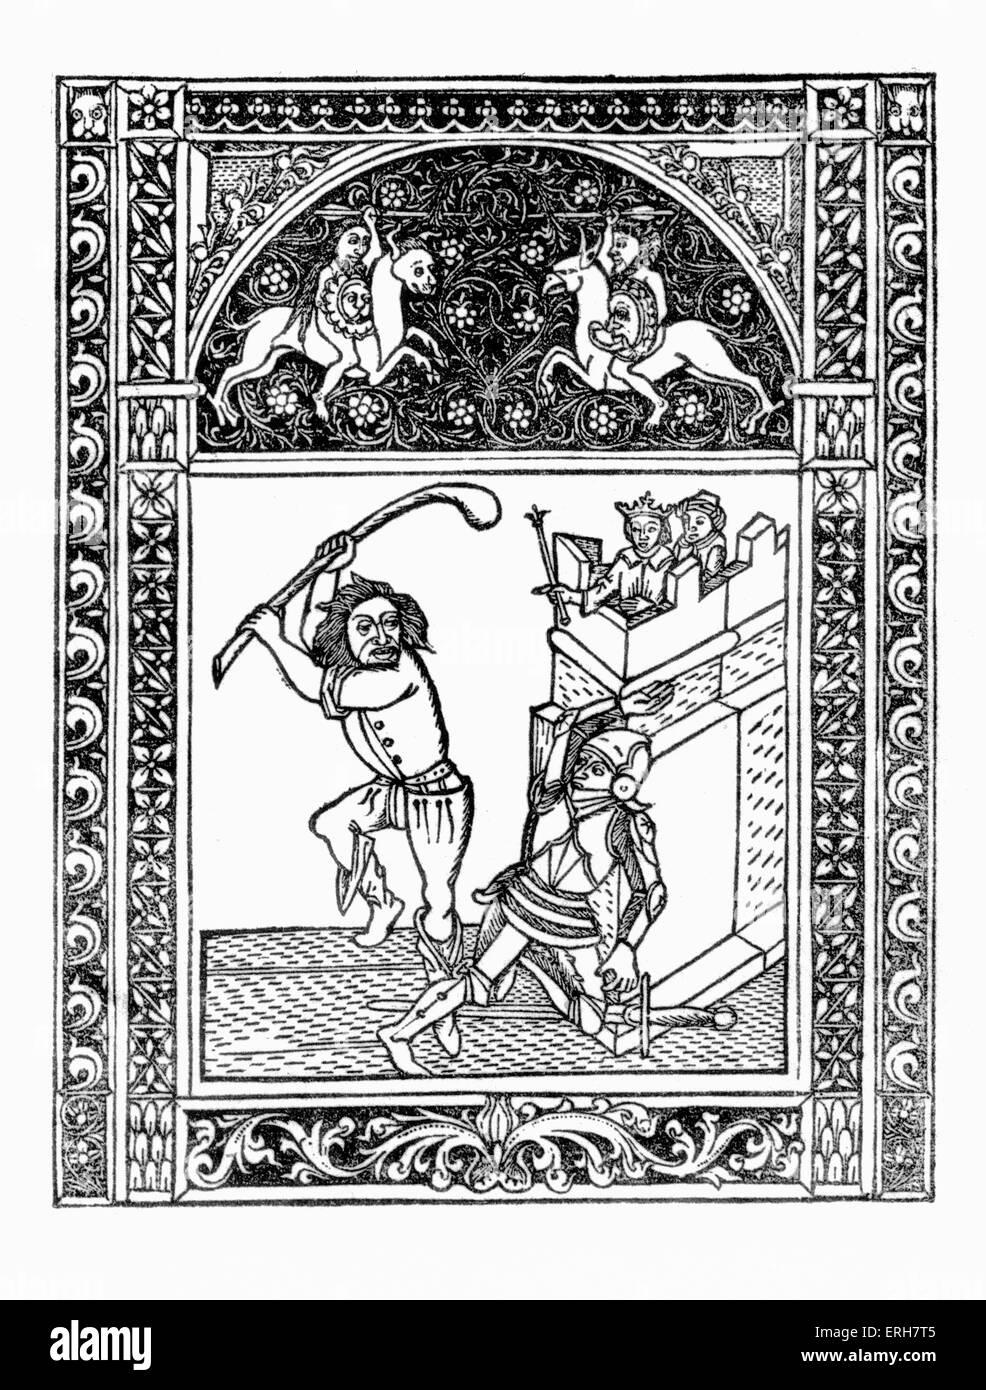 Aesop 's fables: Citizen and the Knight. Illustration after 1485 edition printed in Naples by German printers for Francesco del Stock Photo